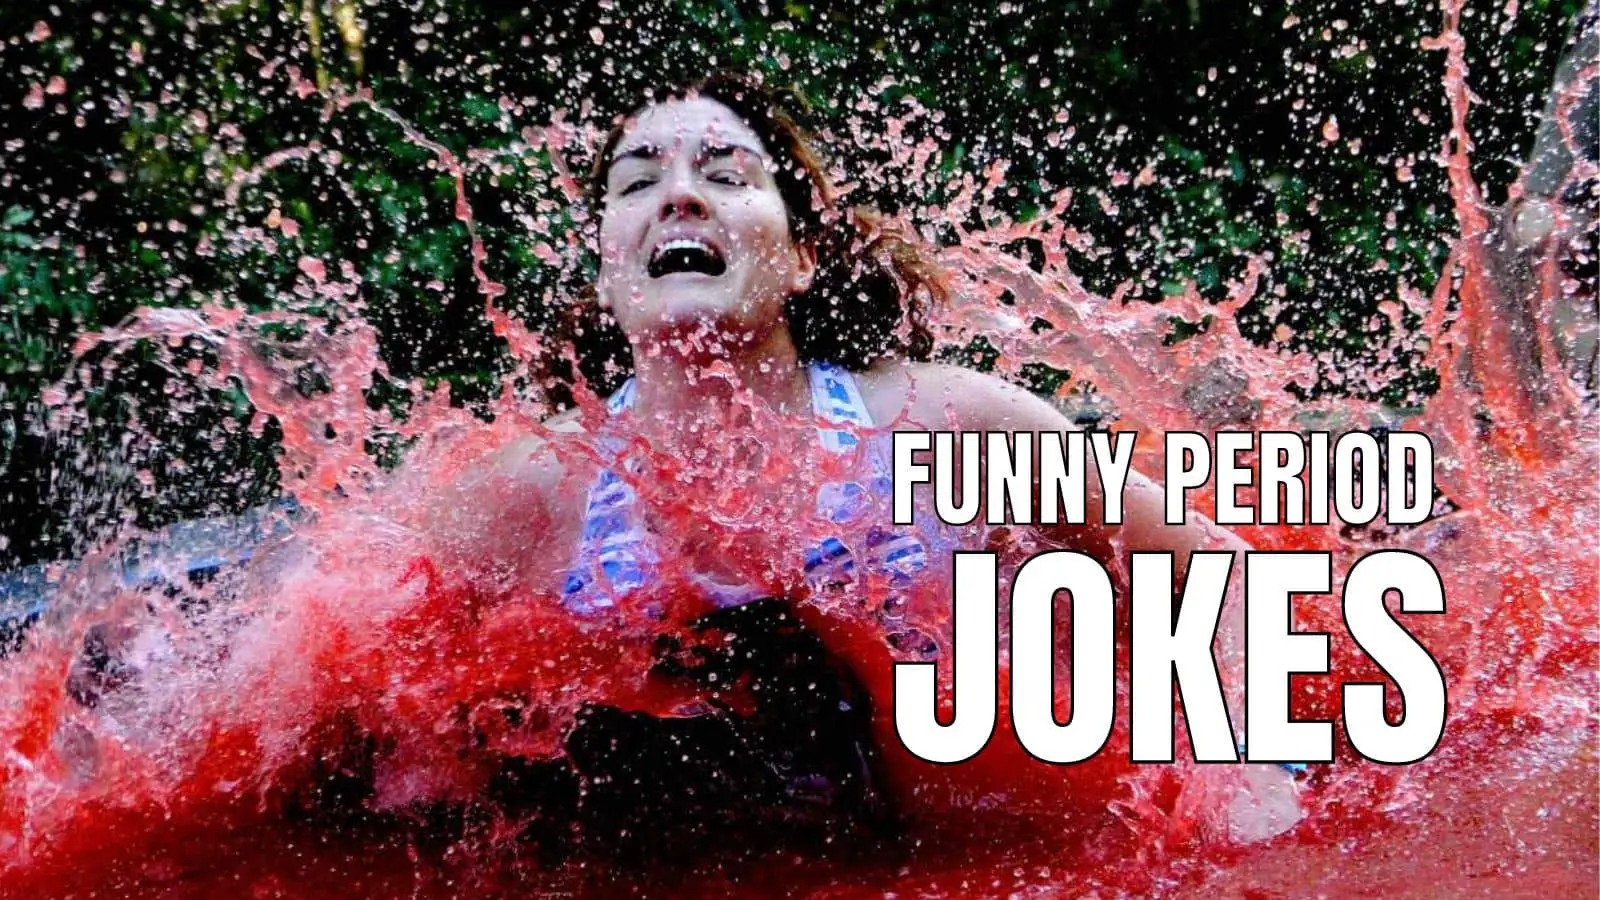 60 Period Jokes That Will Make Her Laugh Through The Pain